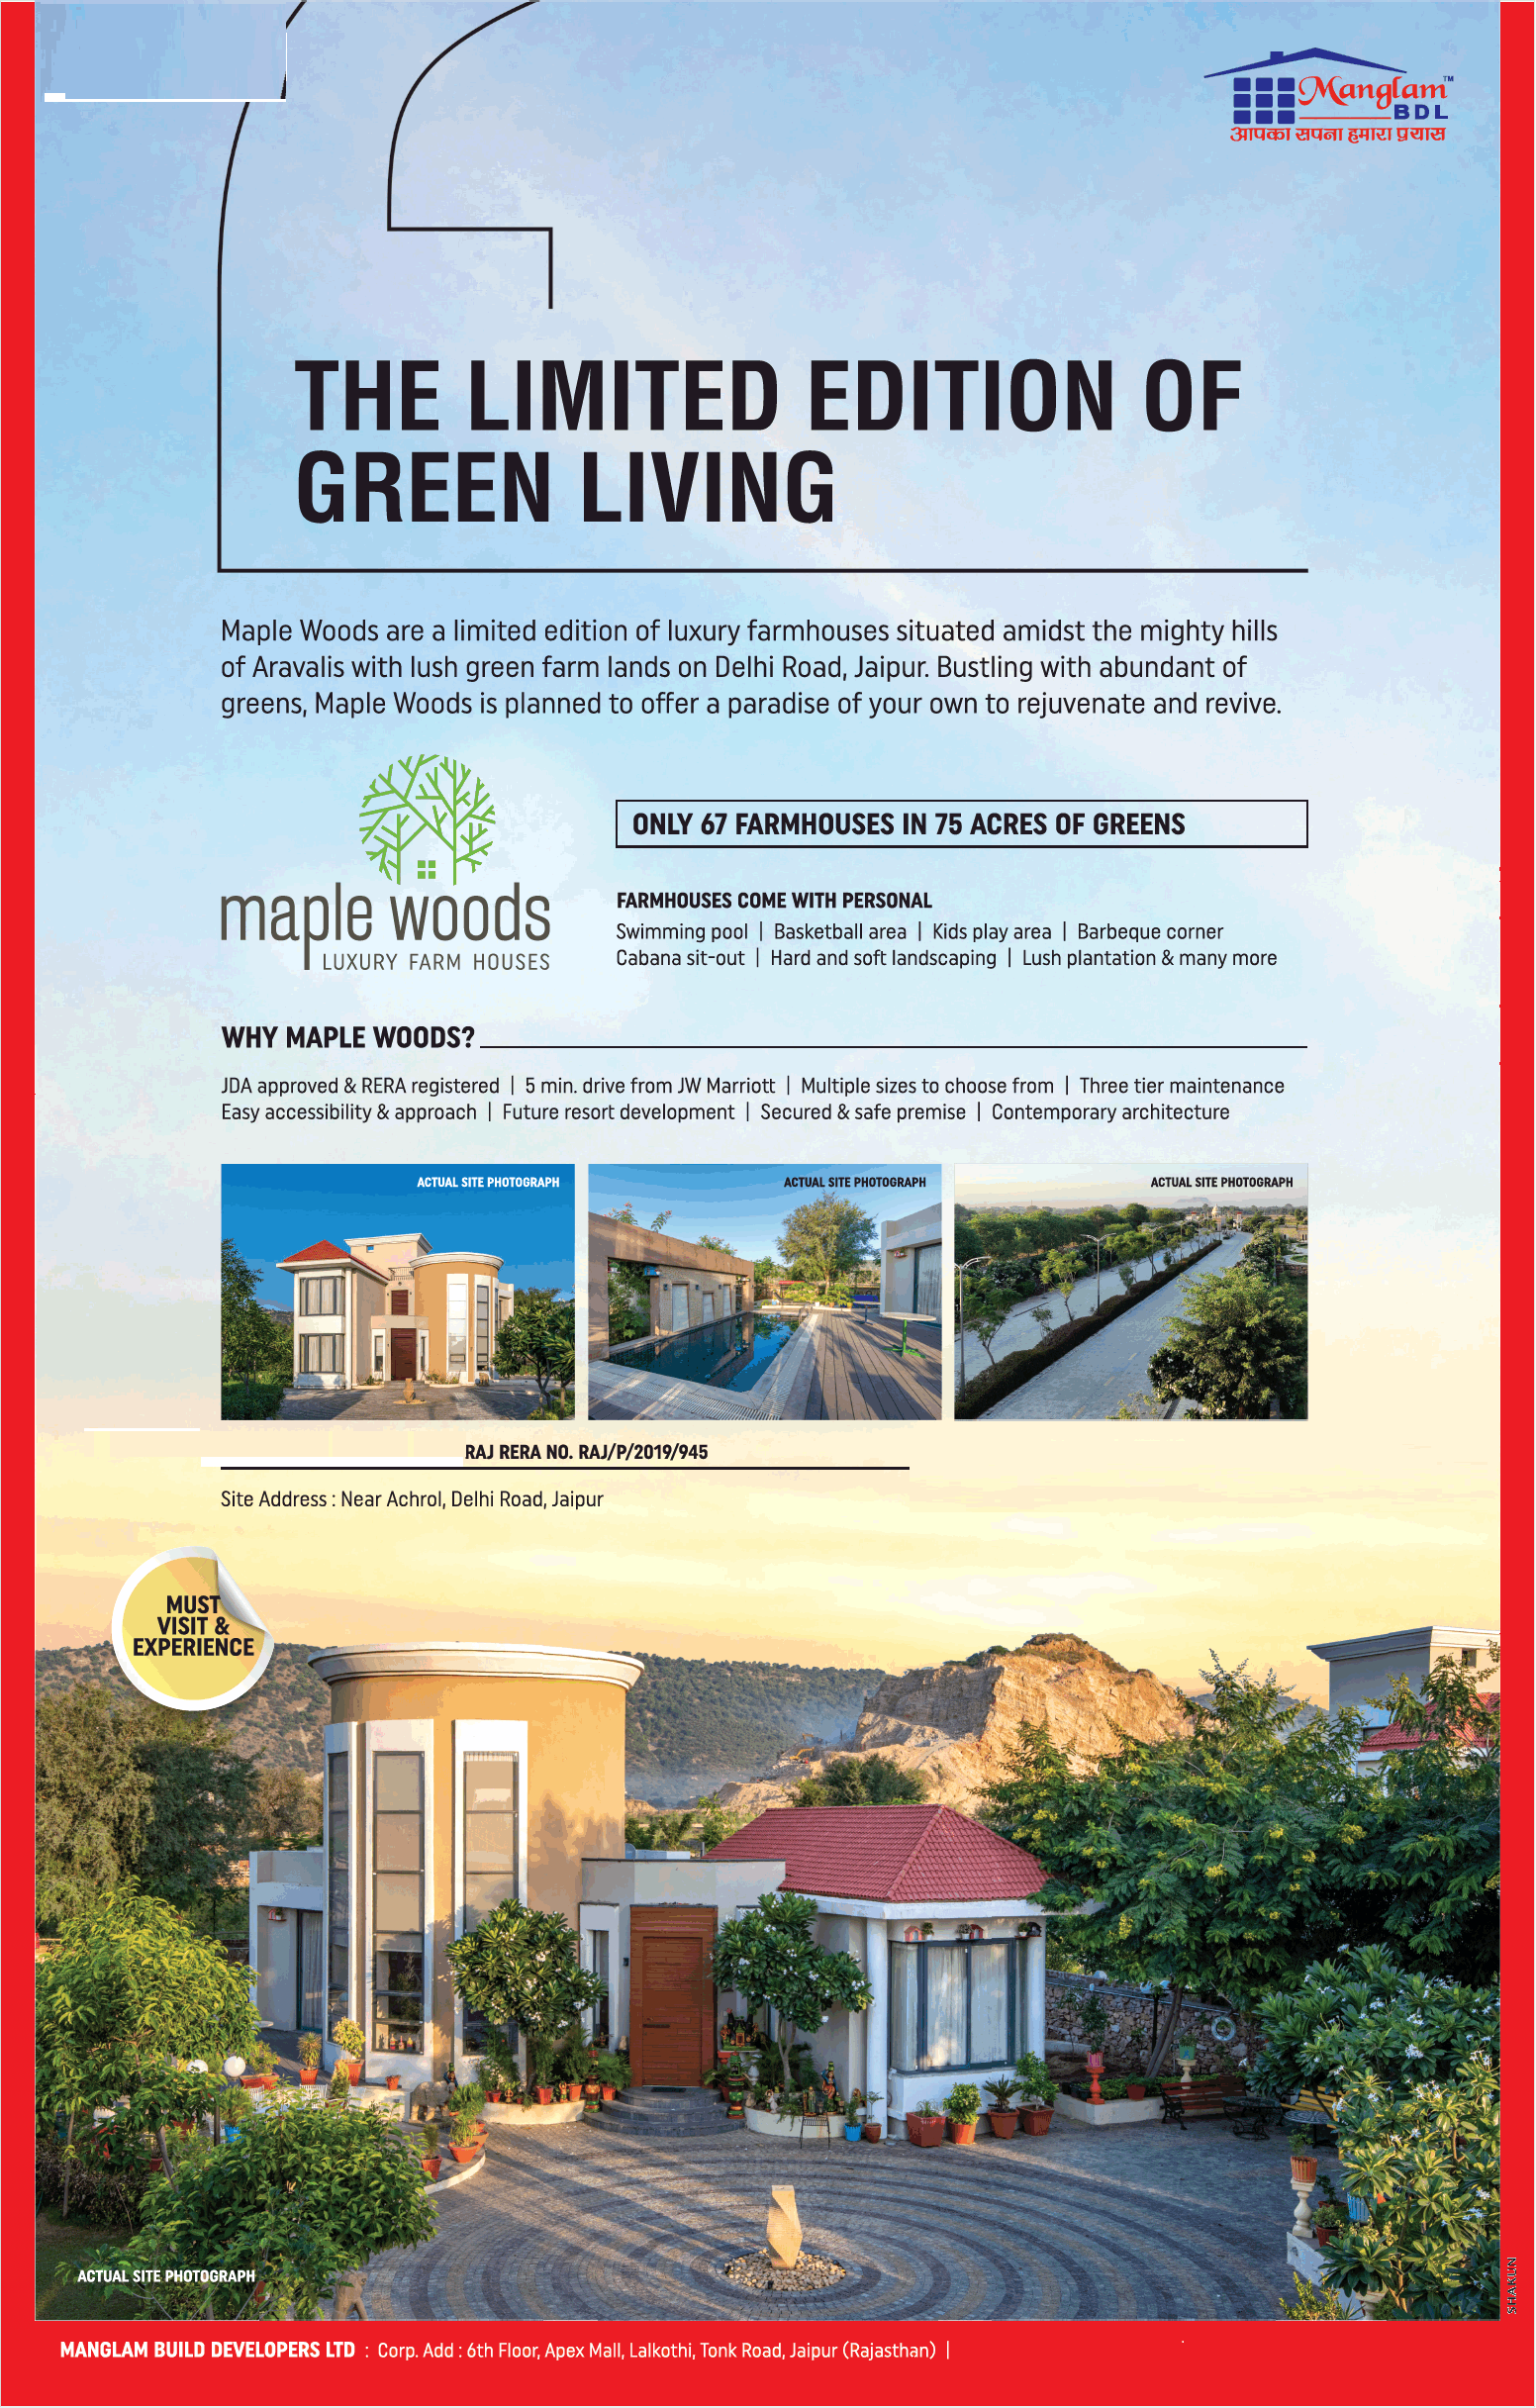 Presenting luxury farm house at Manglam Maple Woods in Jaipur